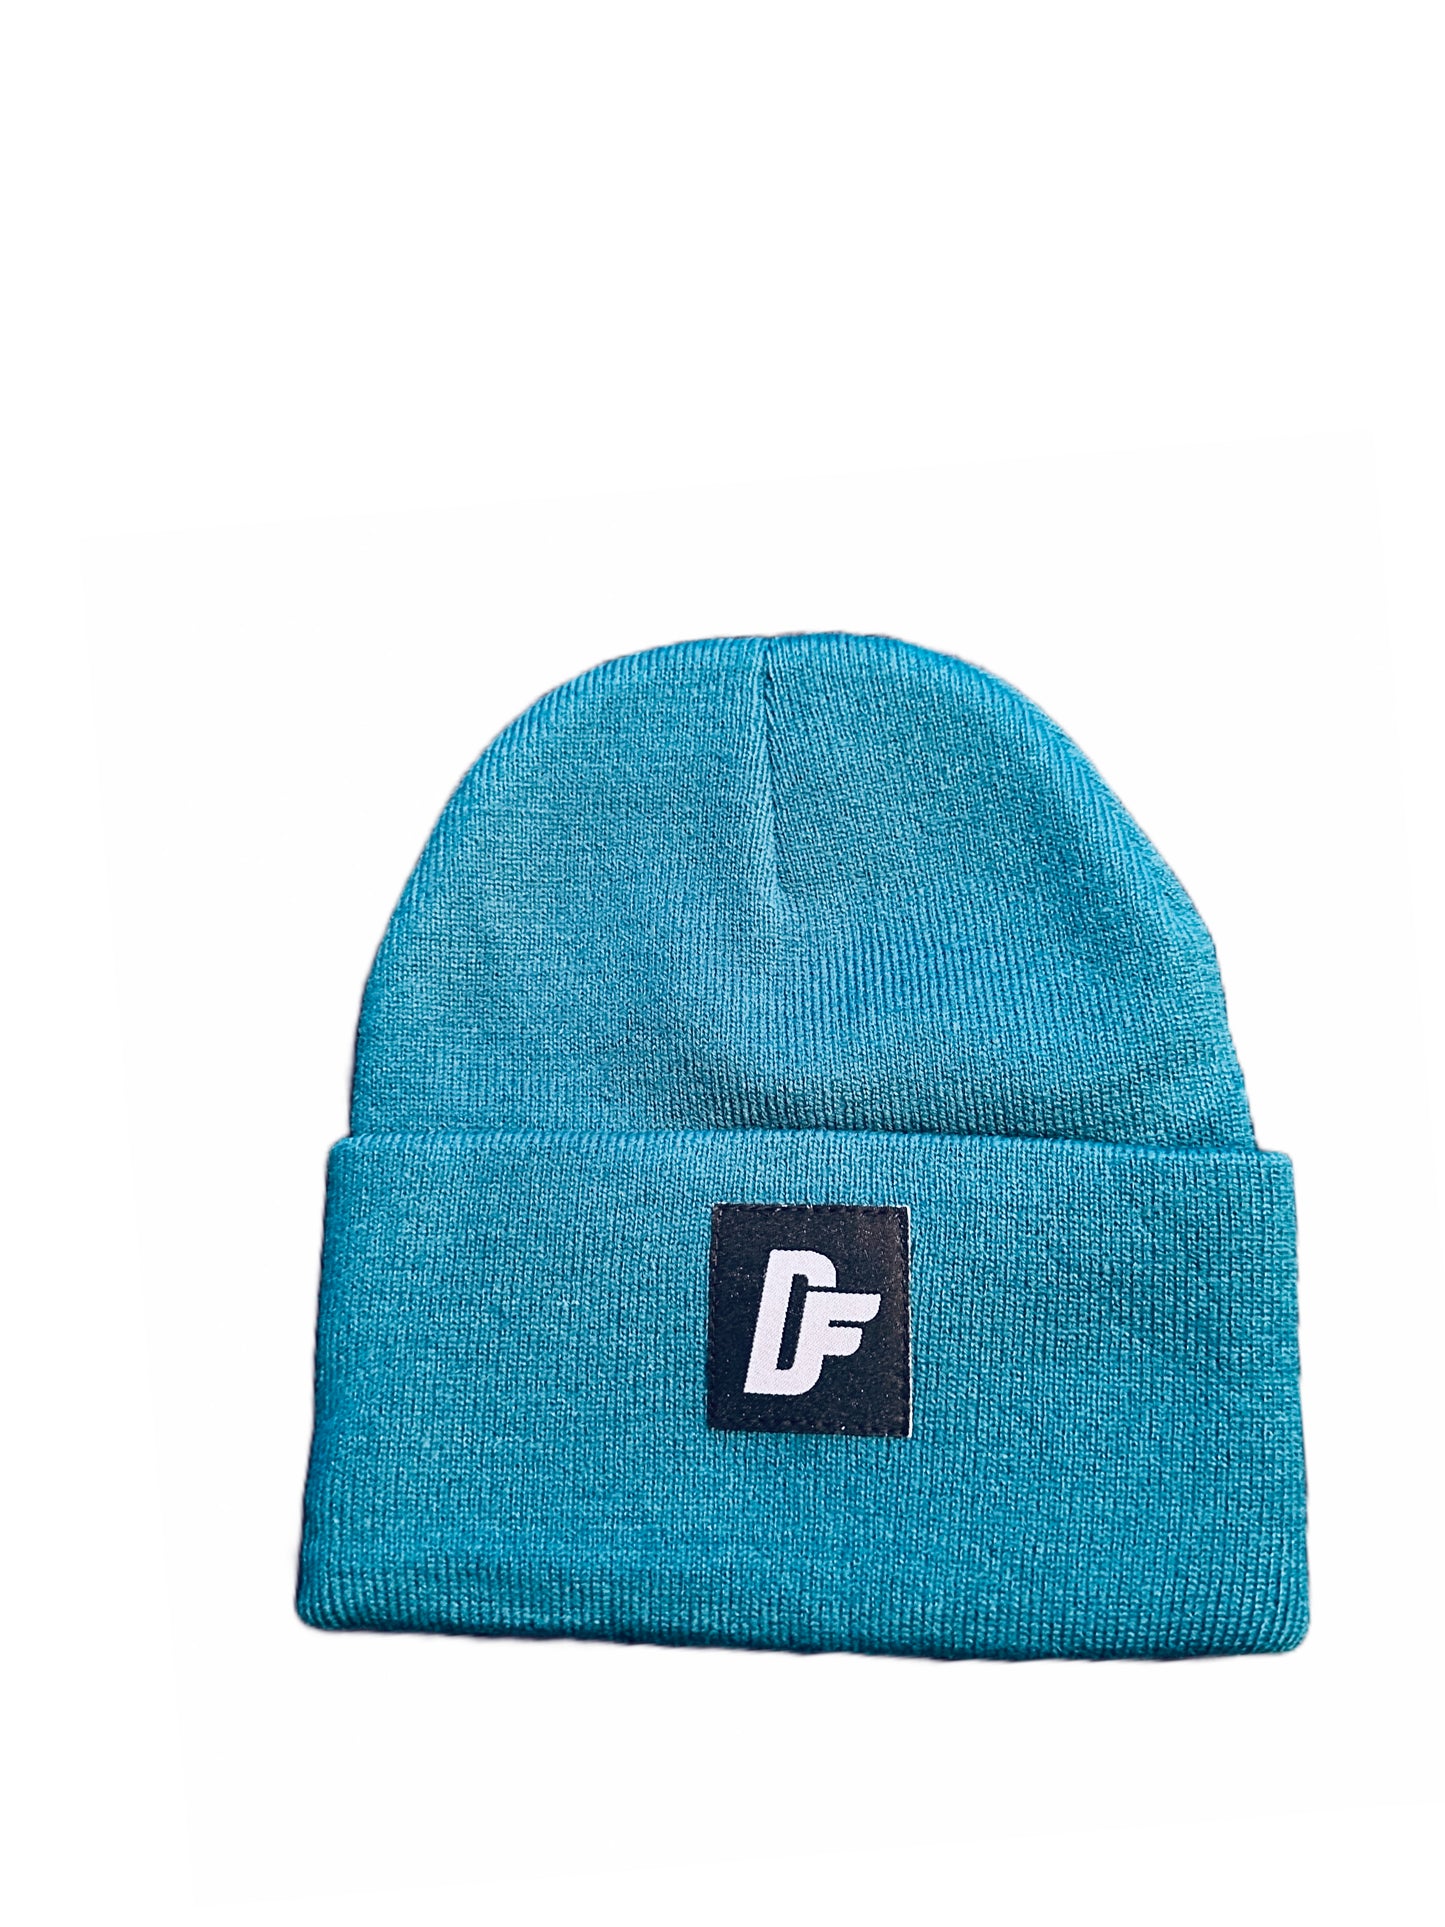 Donnell Fit Beanie